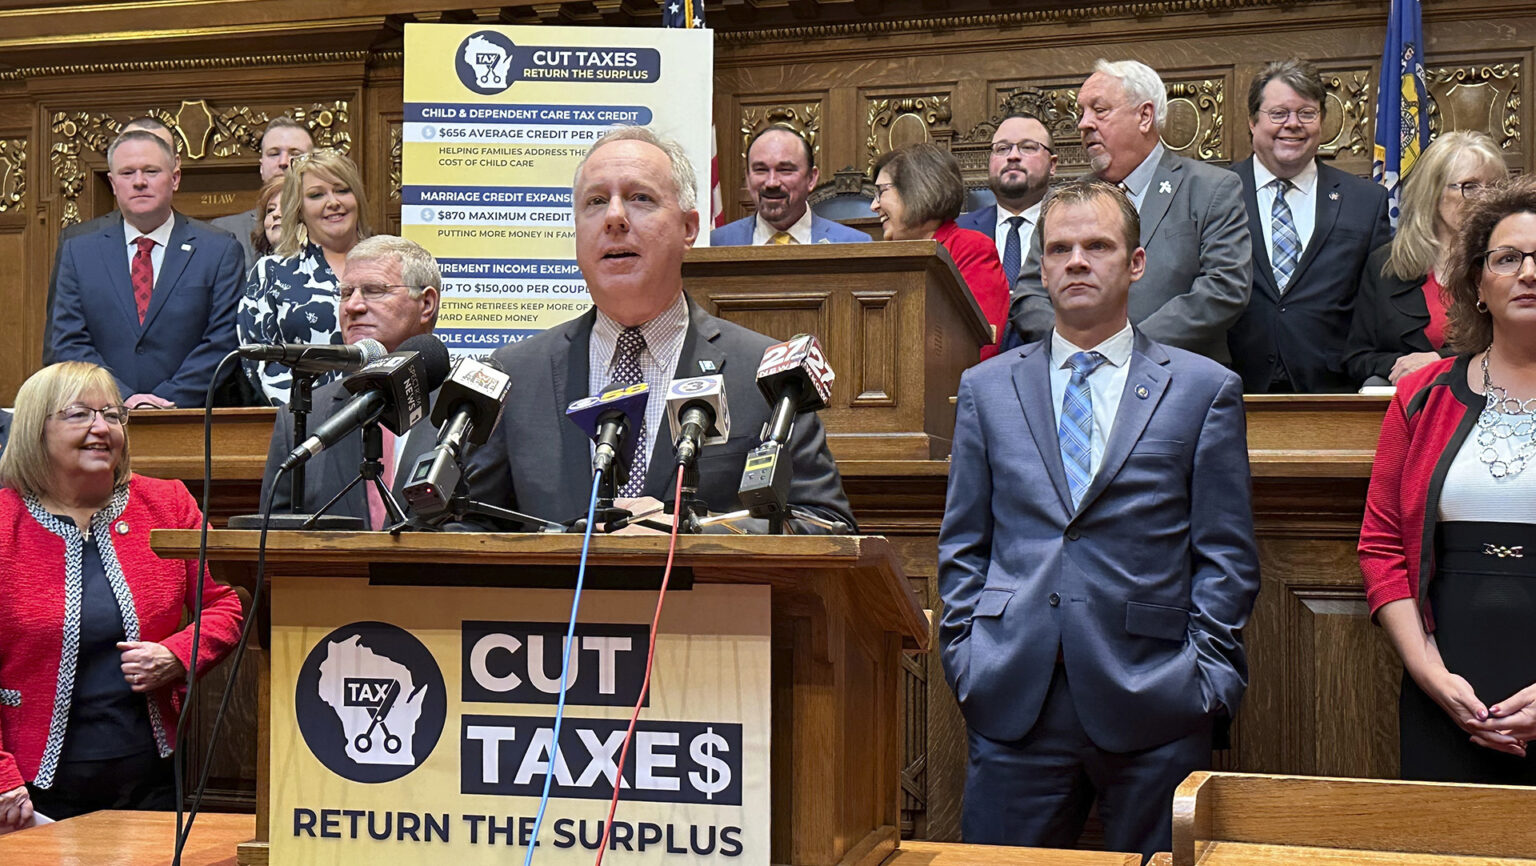 Robin Vos speaks into multiple microphones with the flags of different media organizations mounted to a wood podium with a sign on its front reading Cut Taxe$ and Return the Surplus that is part at the front of a legislative dais, with Devin LeMahieu standing to one side and other people standing on either side and on a higher tier, with a sign with the same title and multiple bullet points and a Wisconsin flag in the background of a room with carved wood wall panels.